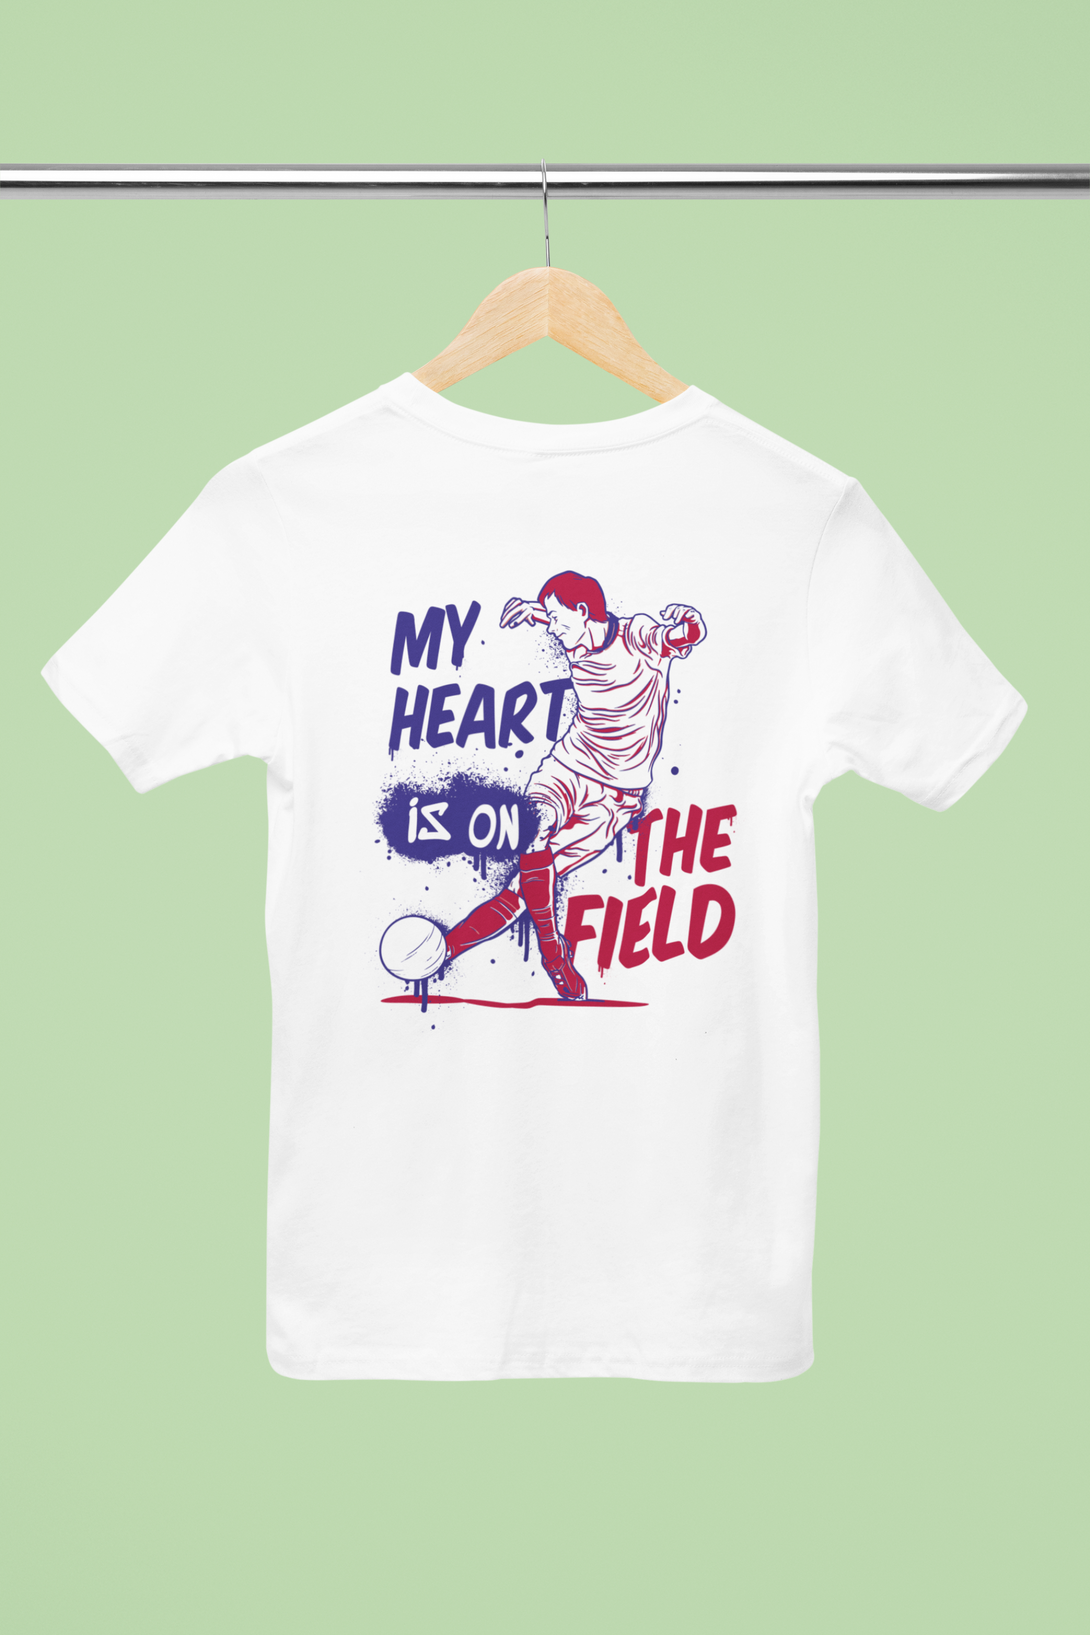 My Heart Is On The Field Printed T-Shirt For Men - WowWaves - 3